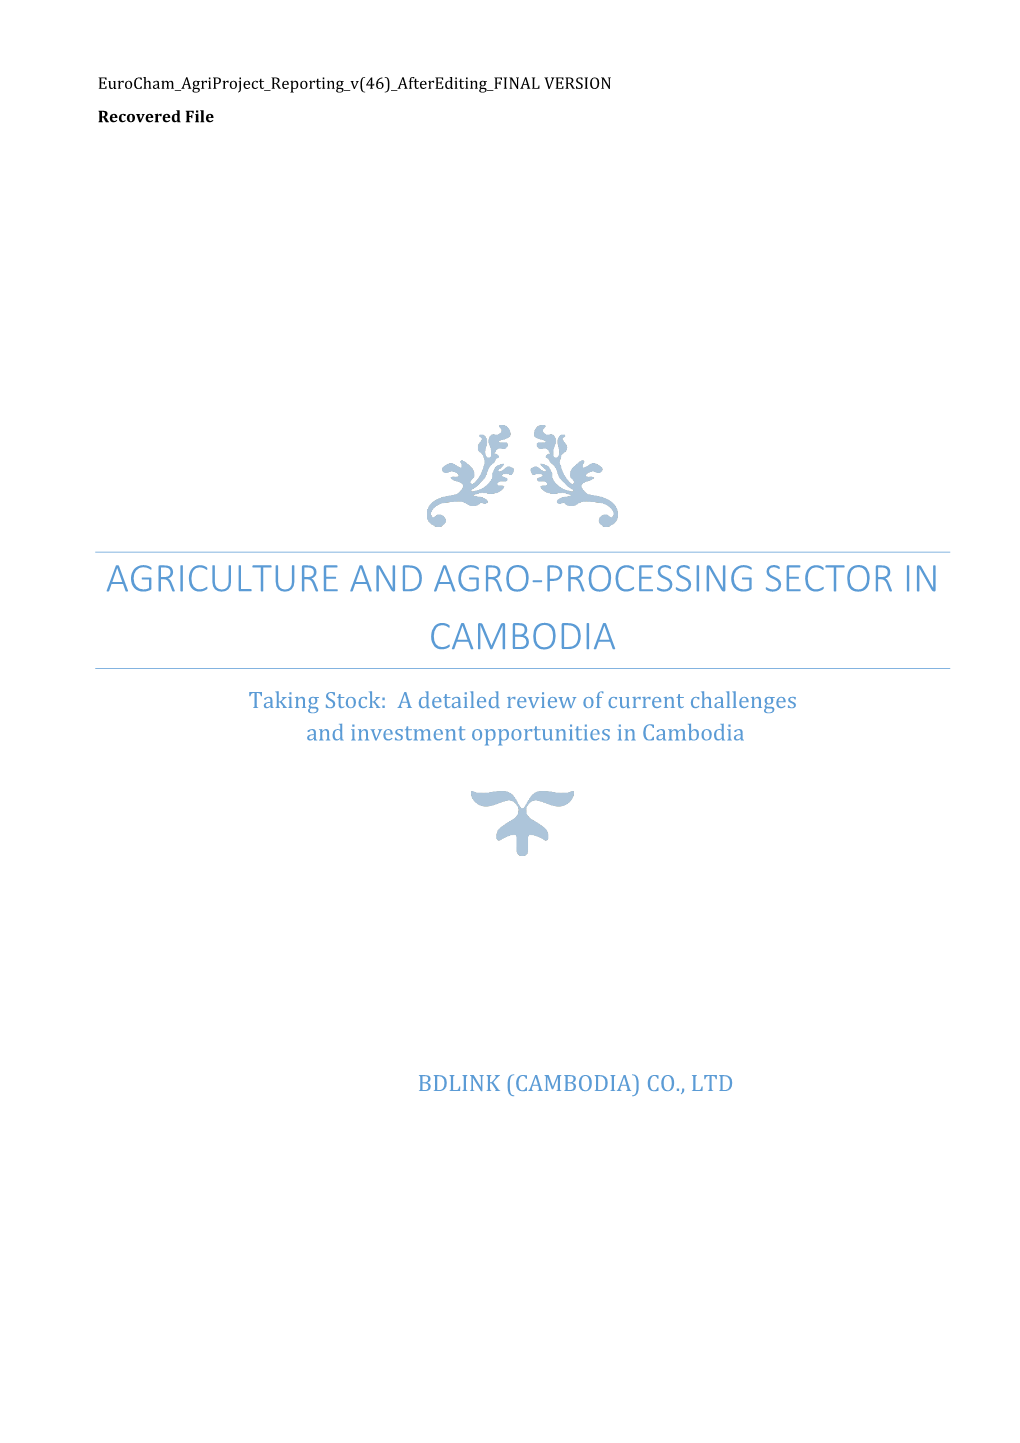 Agriculture and Agro-Processing Sector in Cambodia